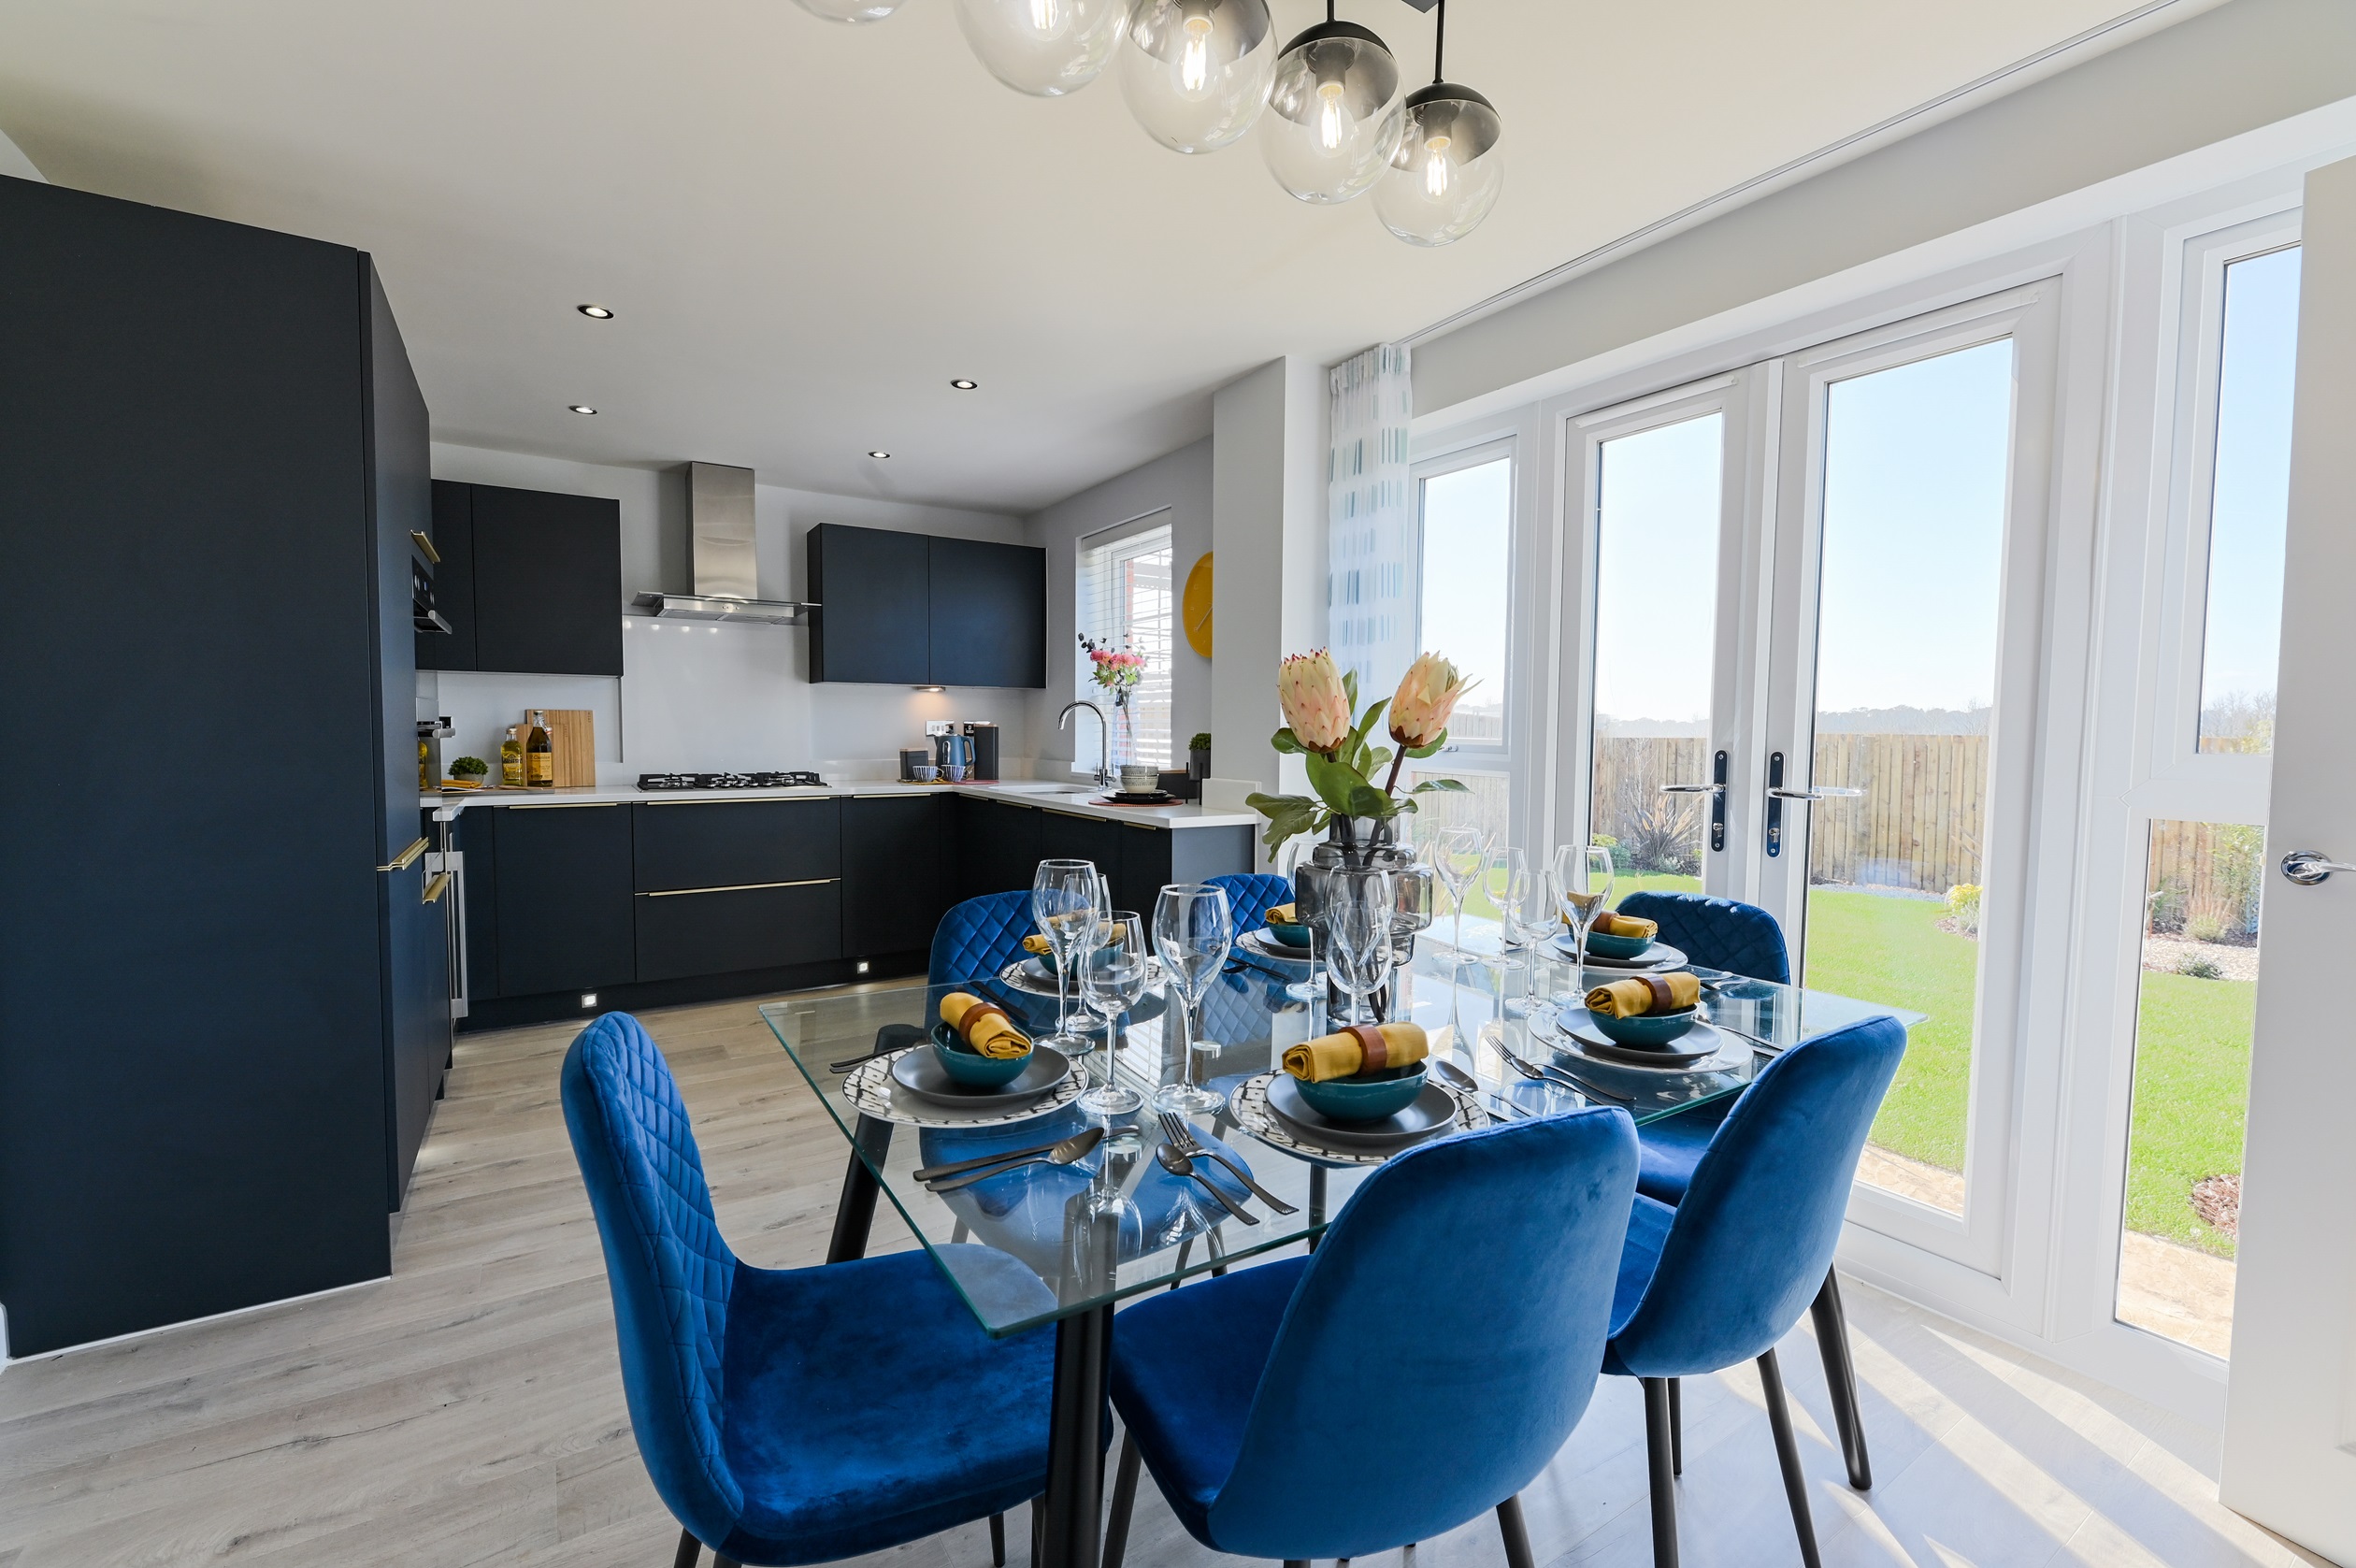 Property 2 of 10. Barratt Windermere 4 Bed Show Home In New Waltham, Wigmore Park French Doors